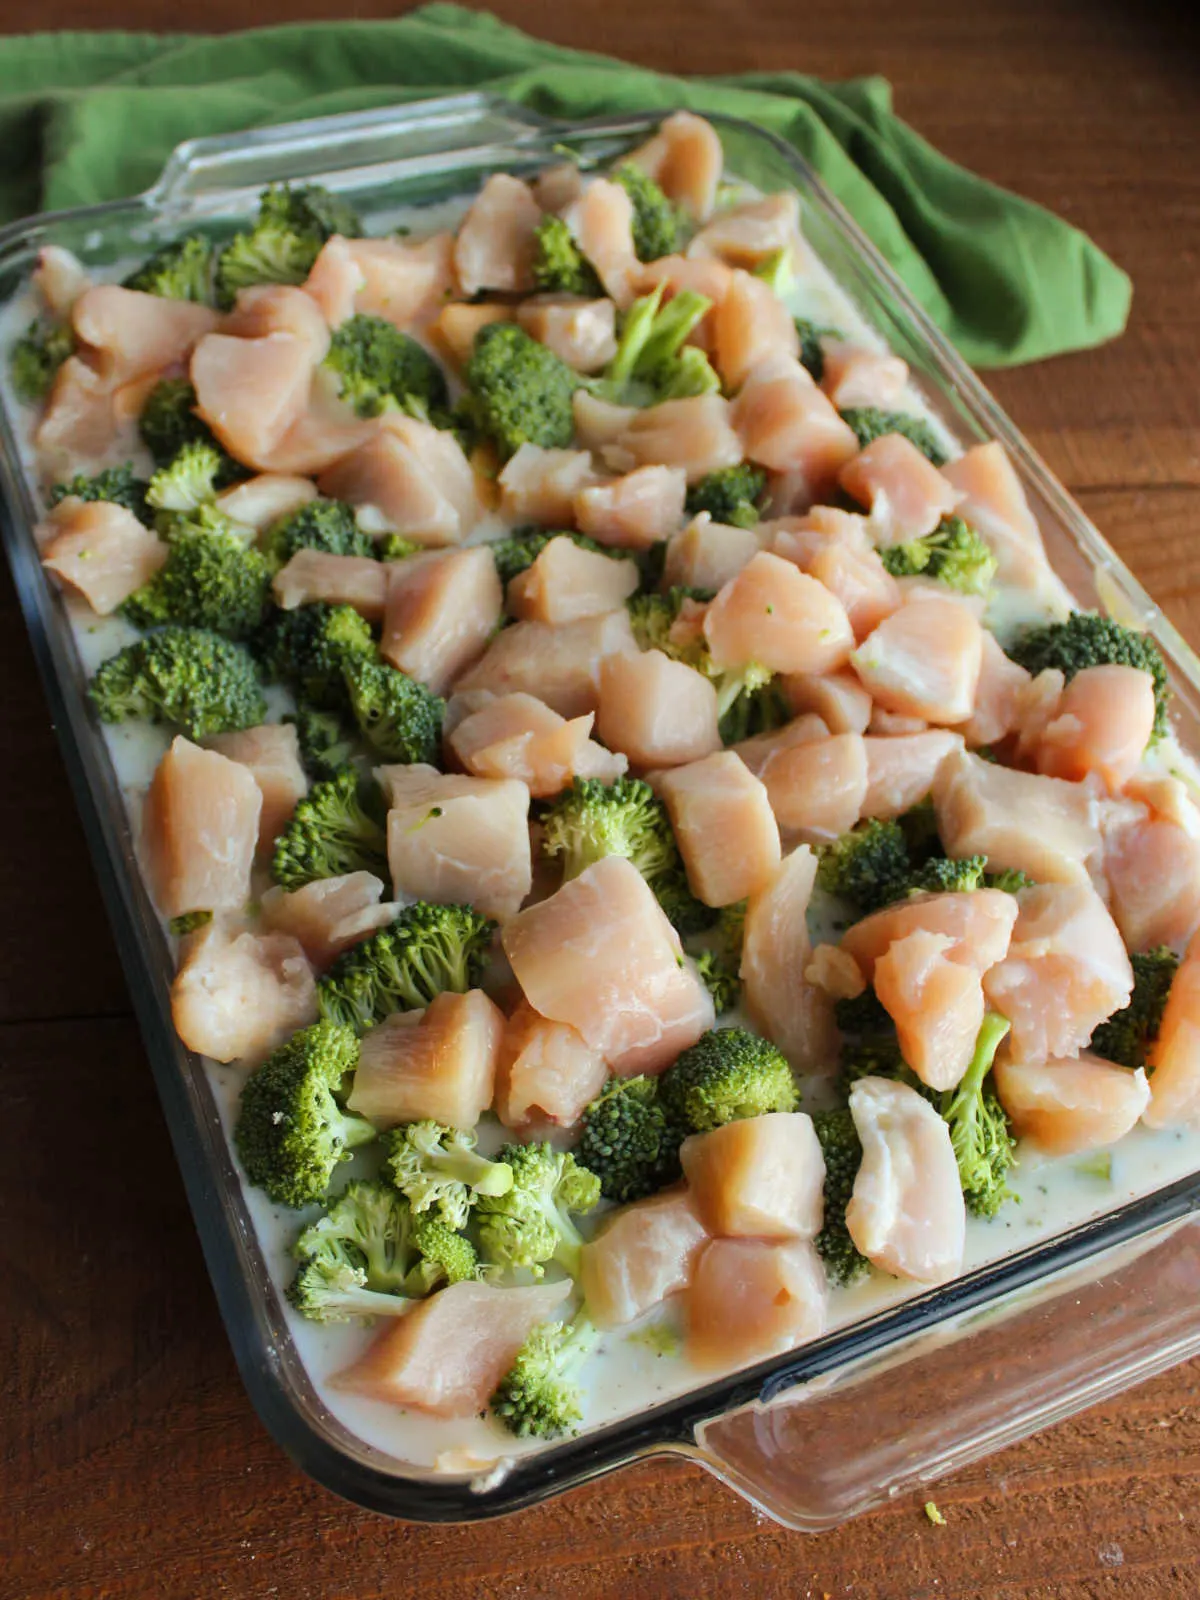 Casserole dish filled with rice and liquid, piled with raw broccoli and chicken, ready to go in the oven.